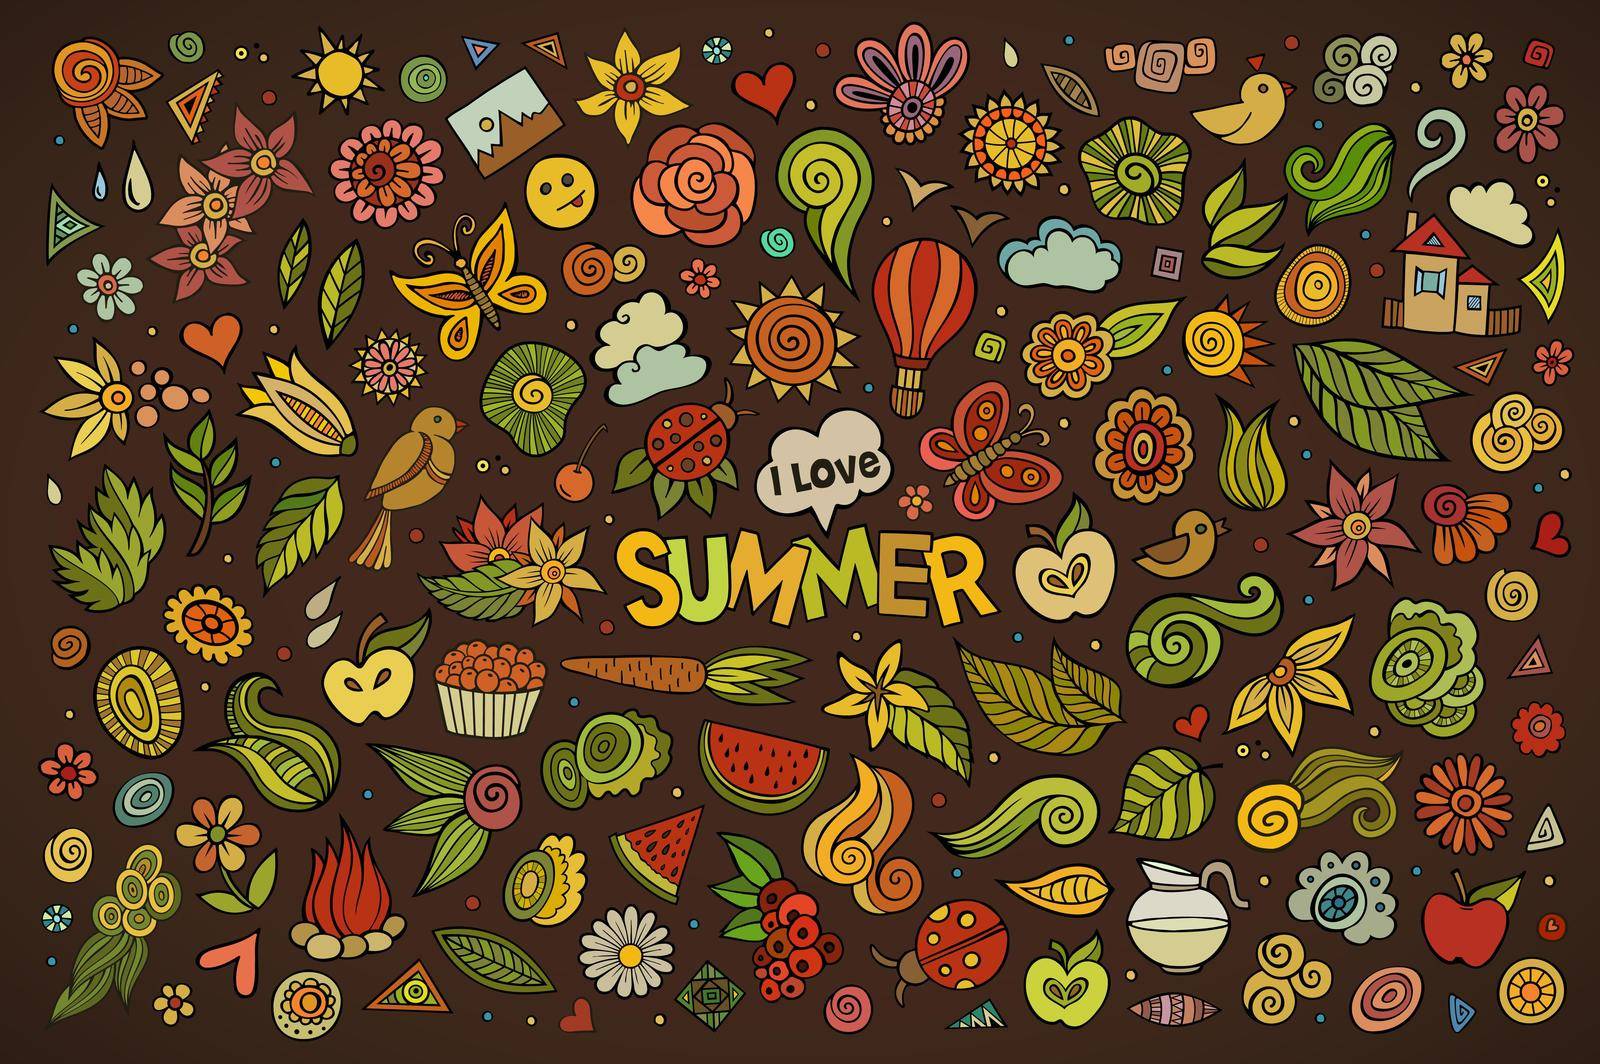 Summer nature hand drawn vector symbols and objects